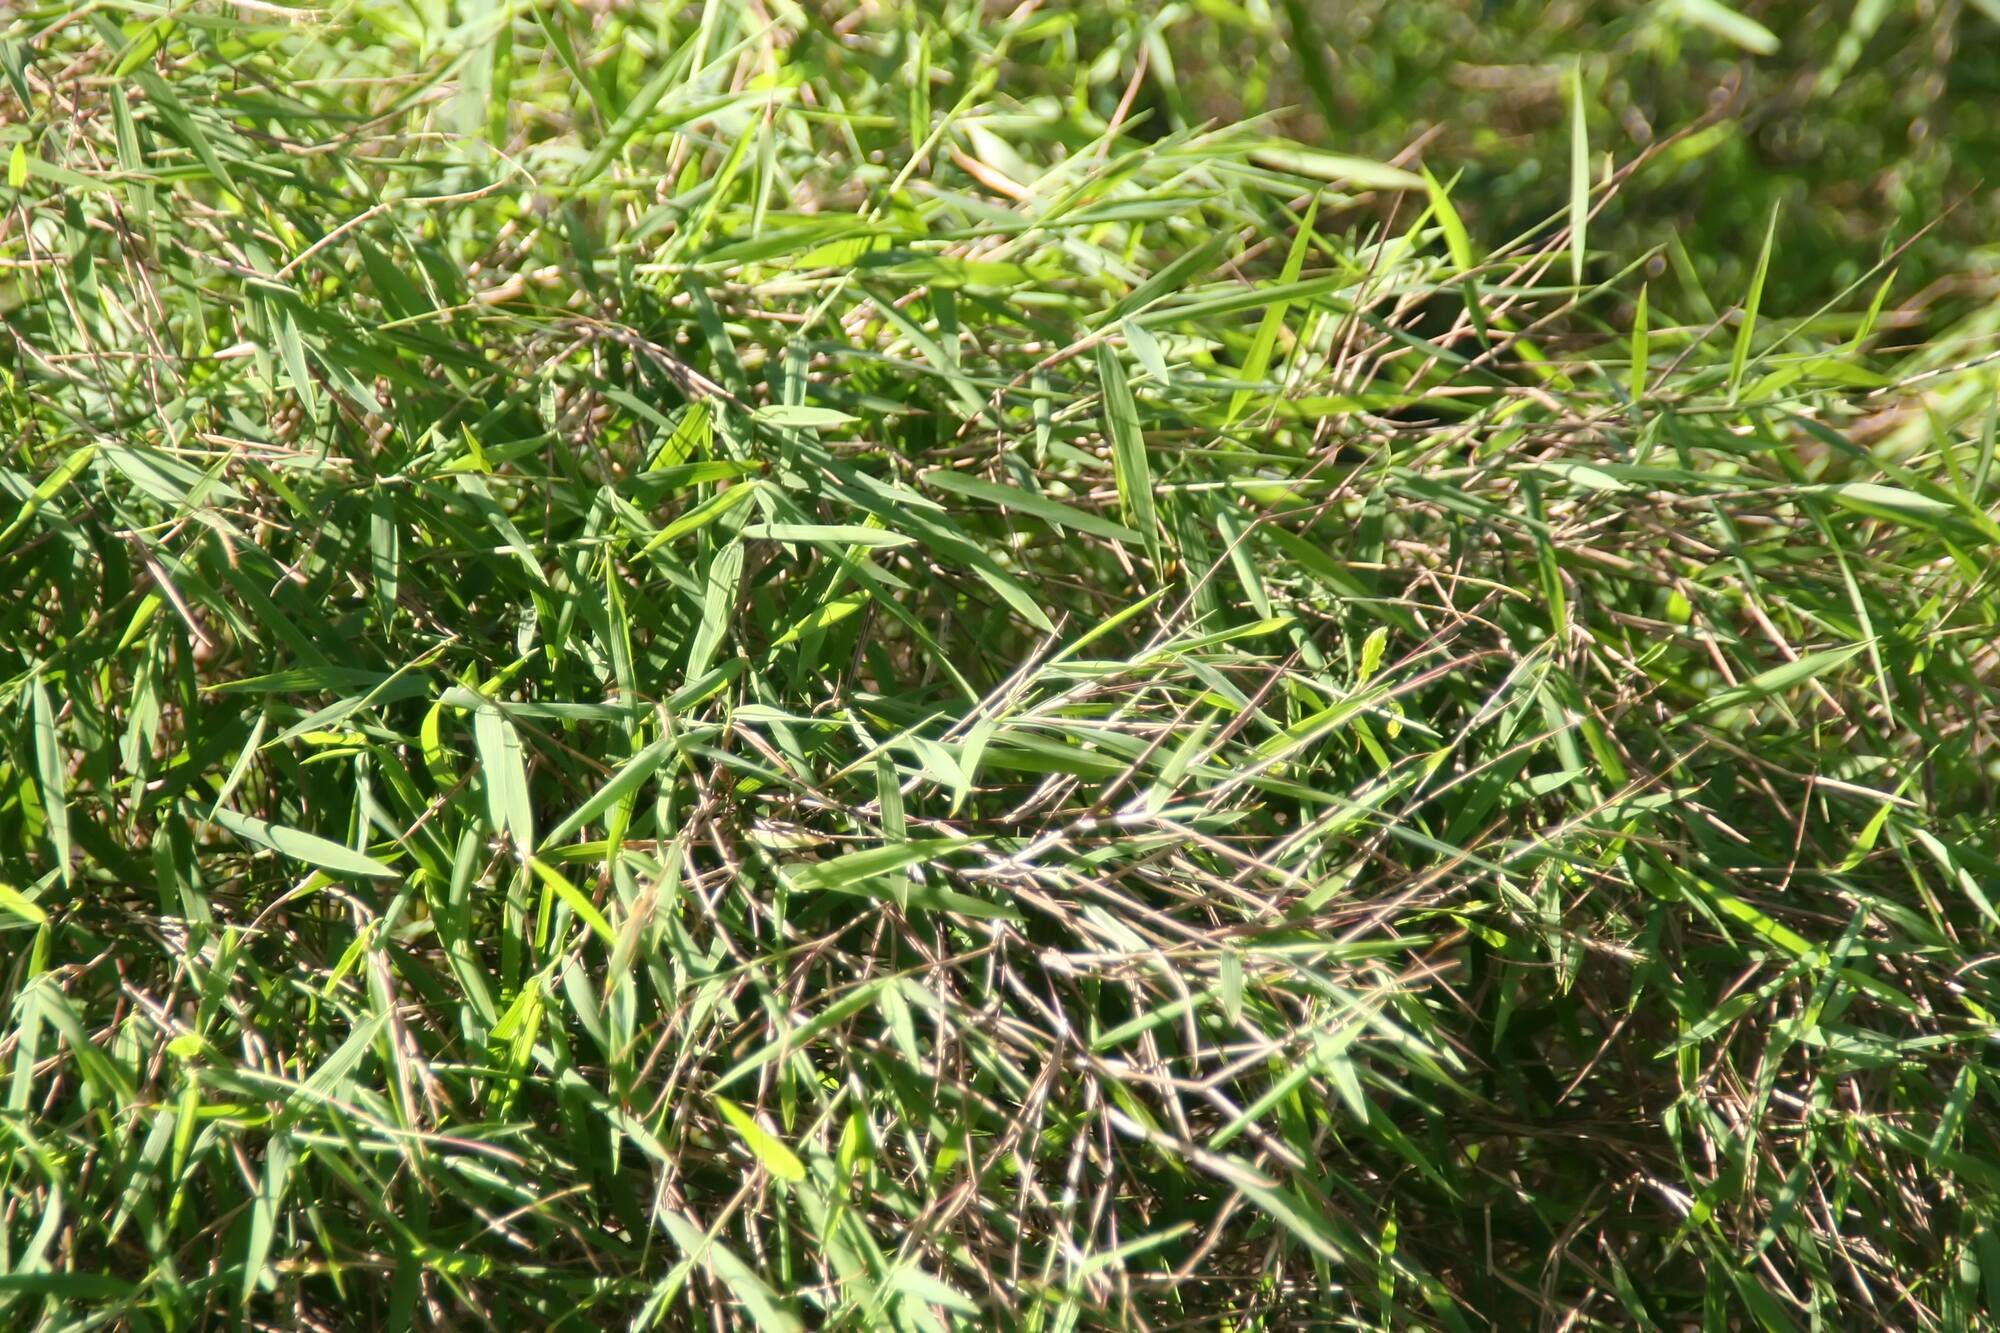 Close up photograph of baby bamboo grass showing elongated green leaves.